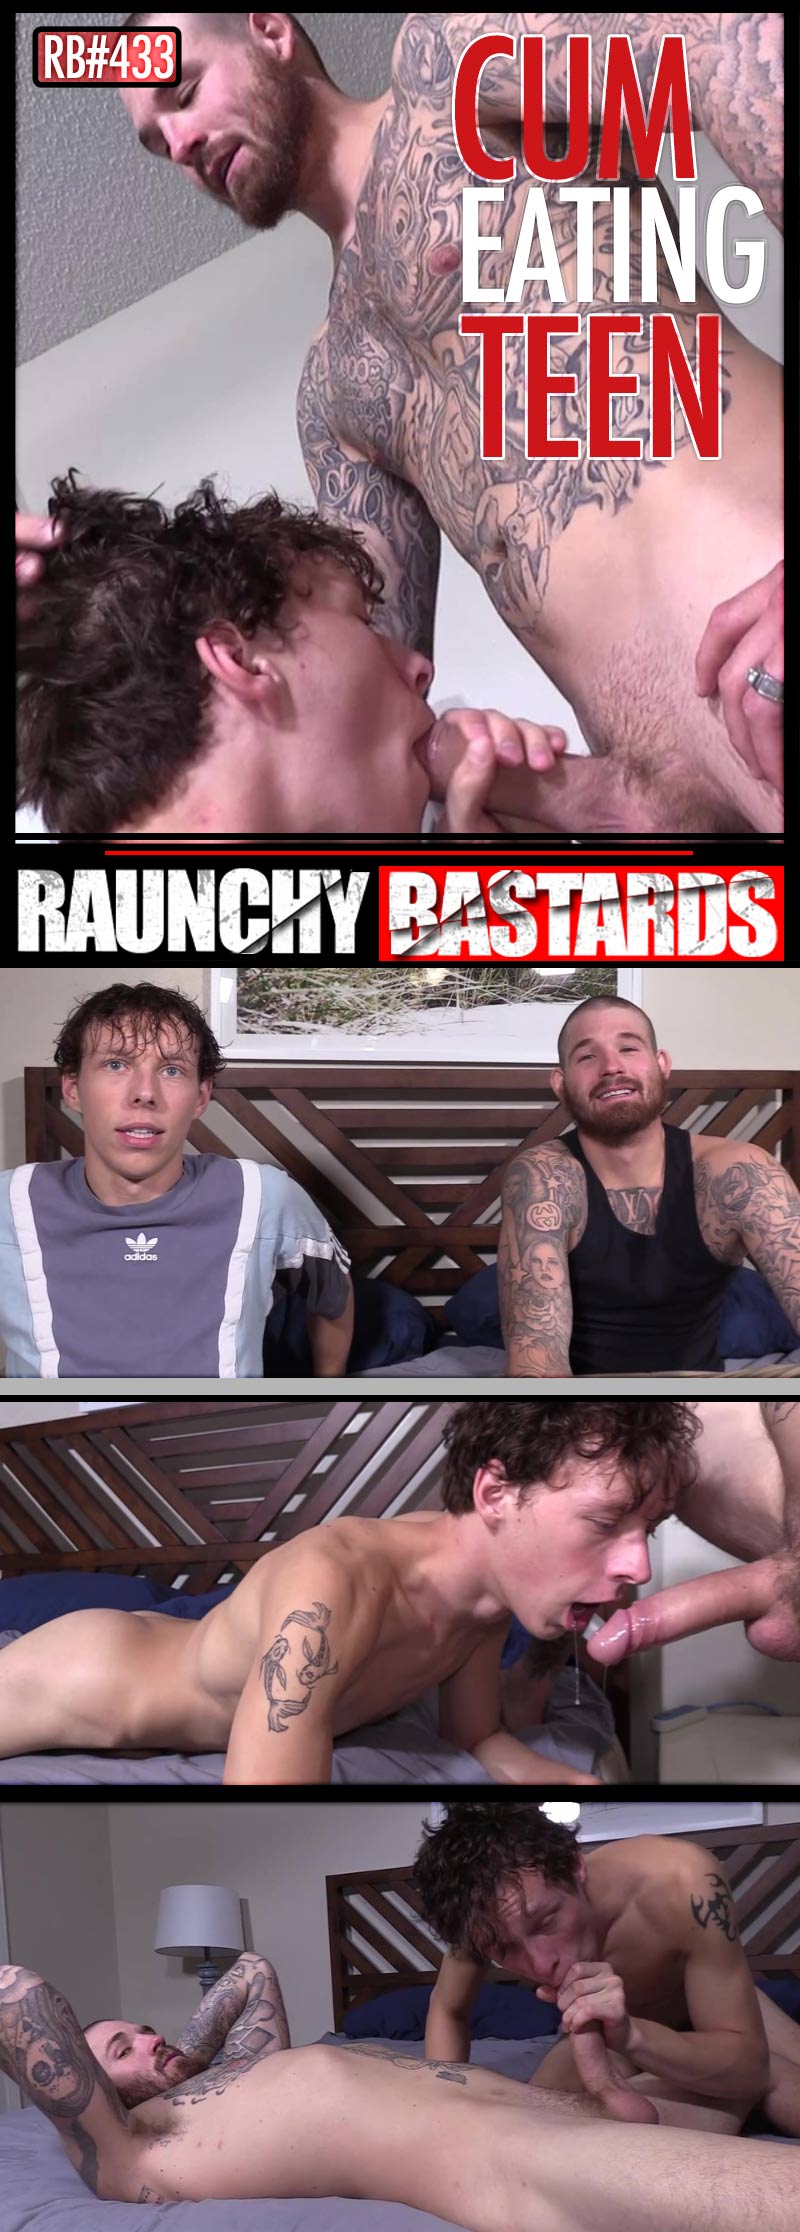 Episode #433: Danny Shine Blows Tattooed JC Lowes in 'Cum Eating Teen' at Raunch Bastards